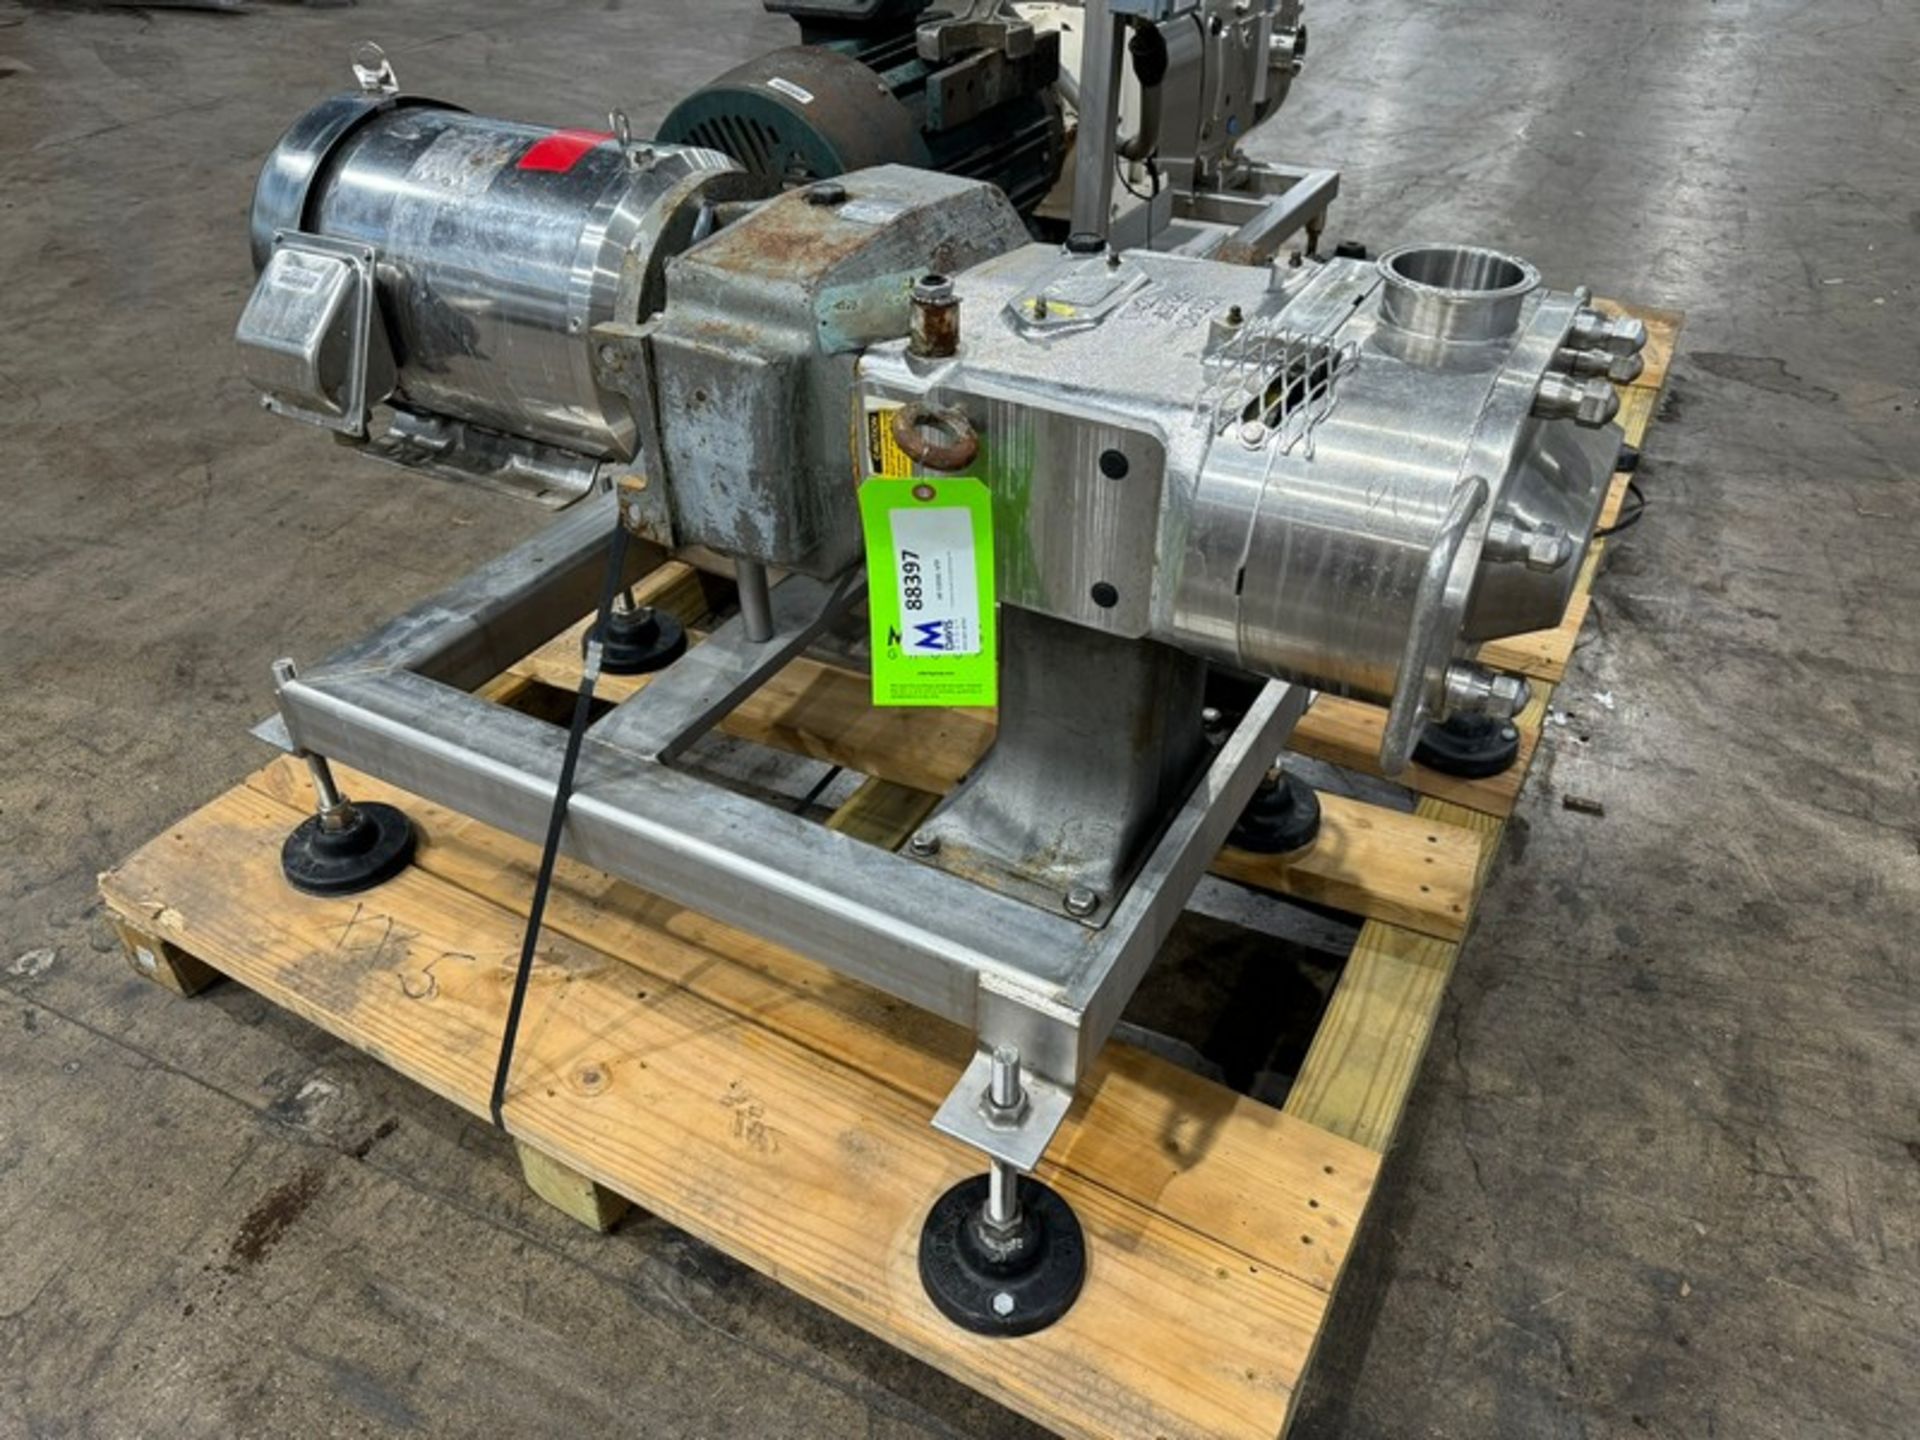 Waukesha Cherry-Burrell 10 hp Positive Displacement Pump, M/N 130U2, S/N 347774 03, with Aprox. 3”